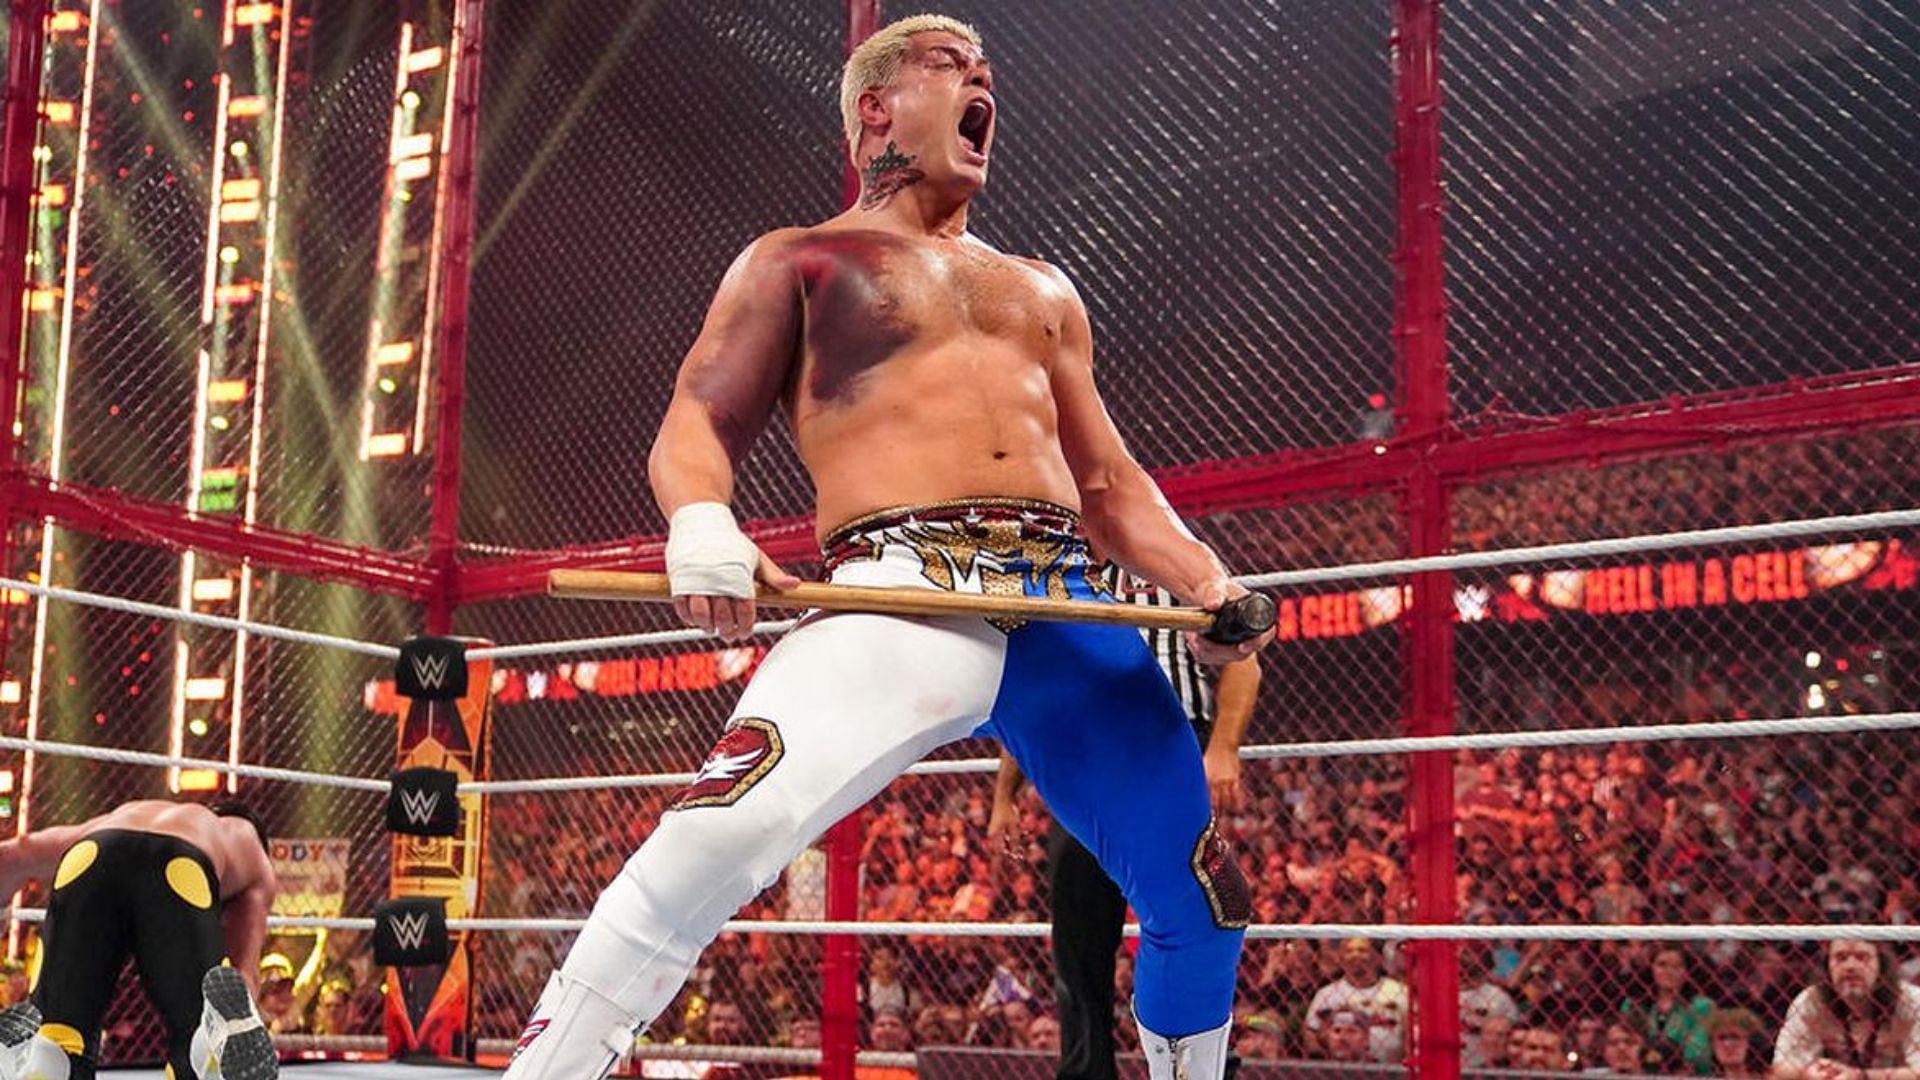 Cody Rhodes battling Seth Rollins at WWE Hell in a Cell